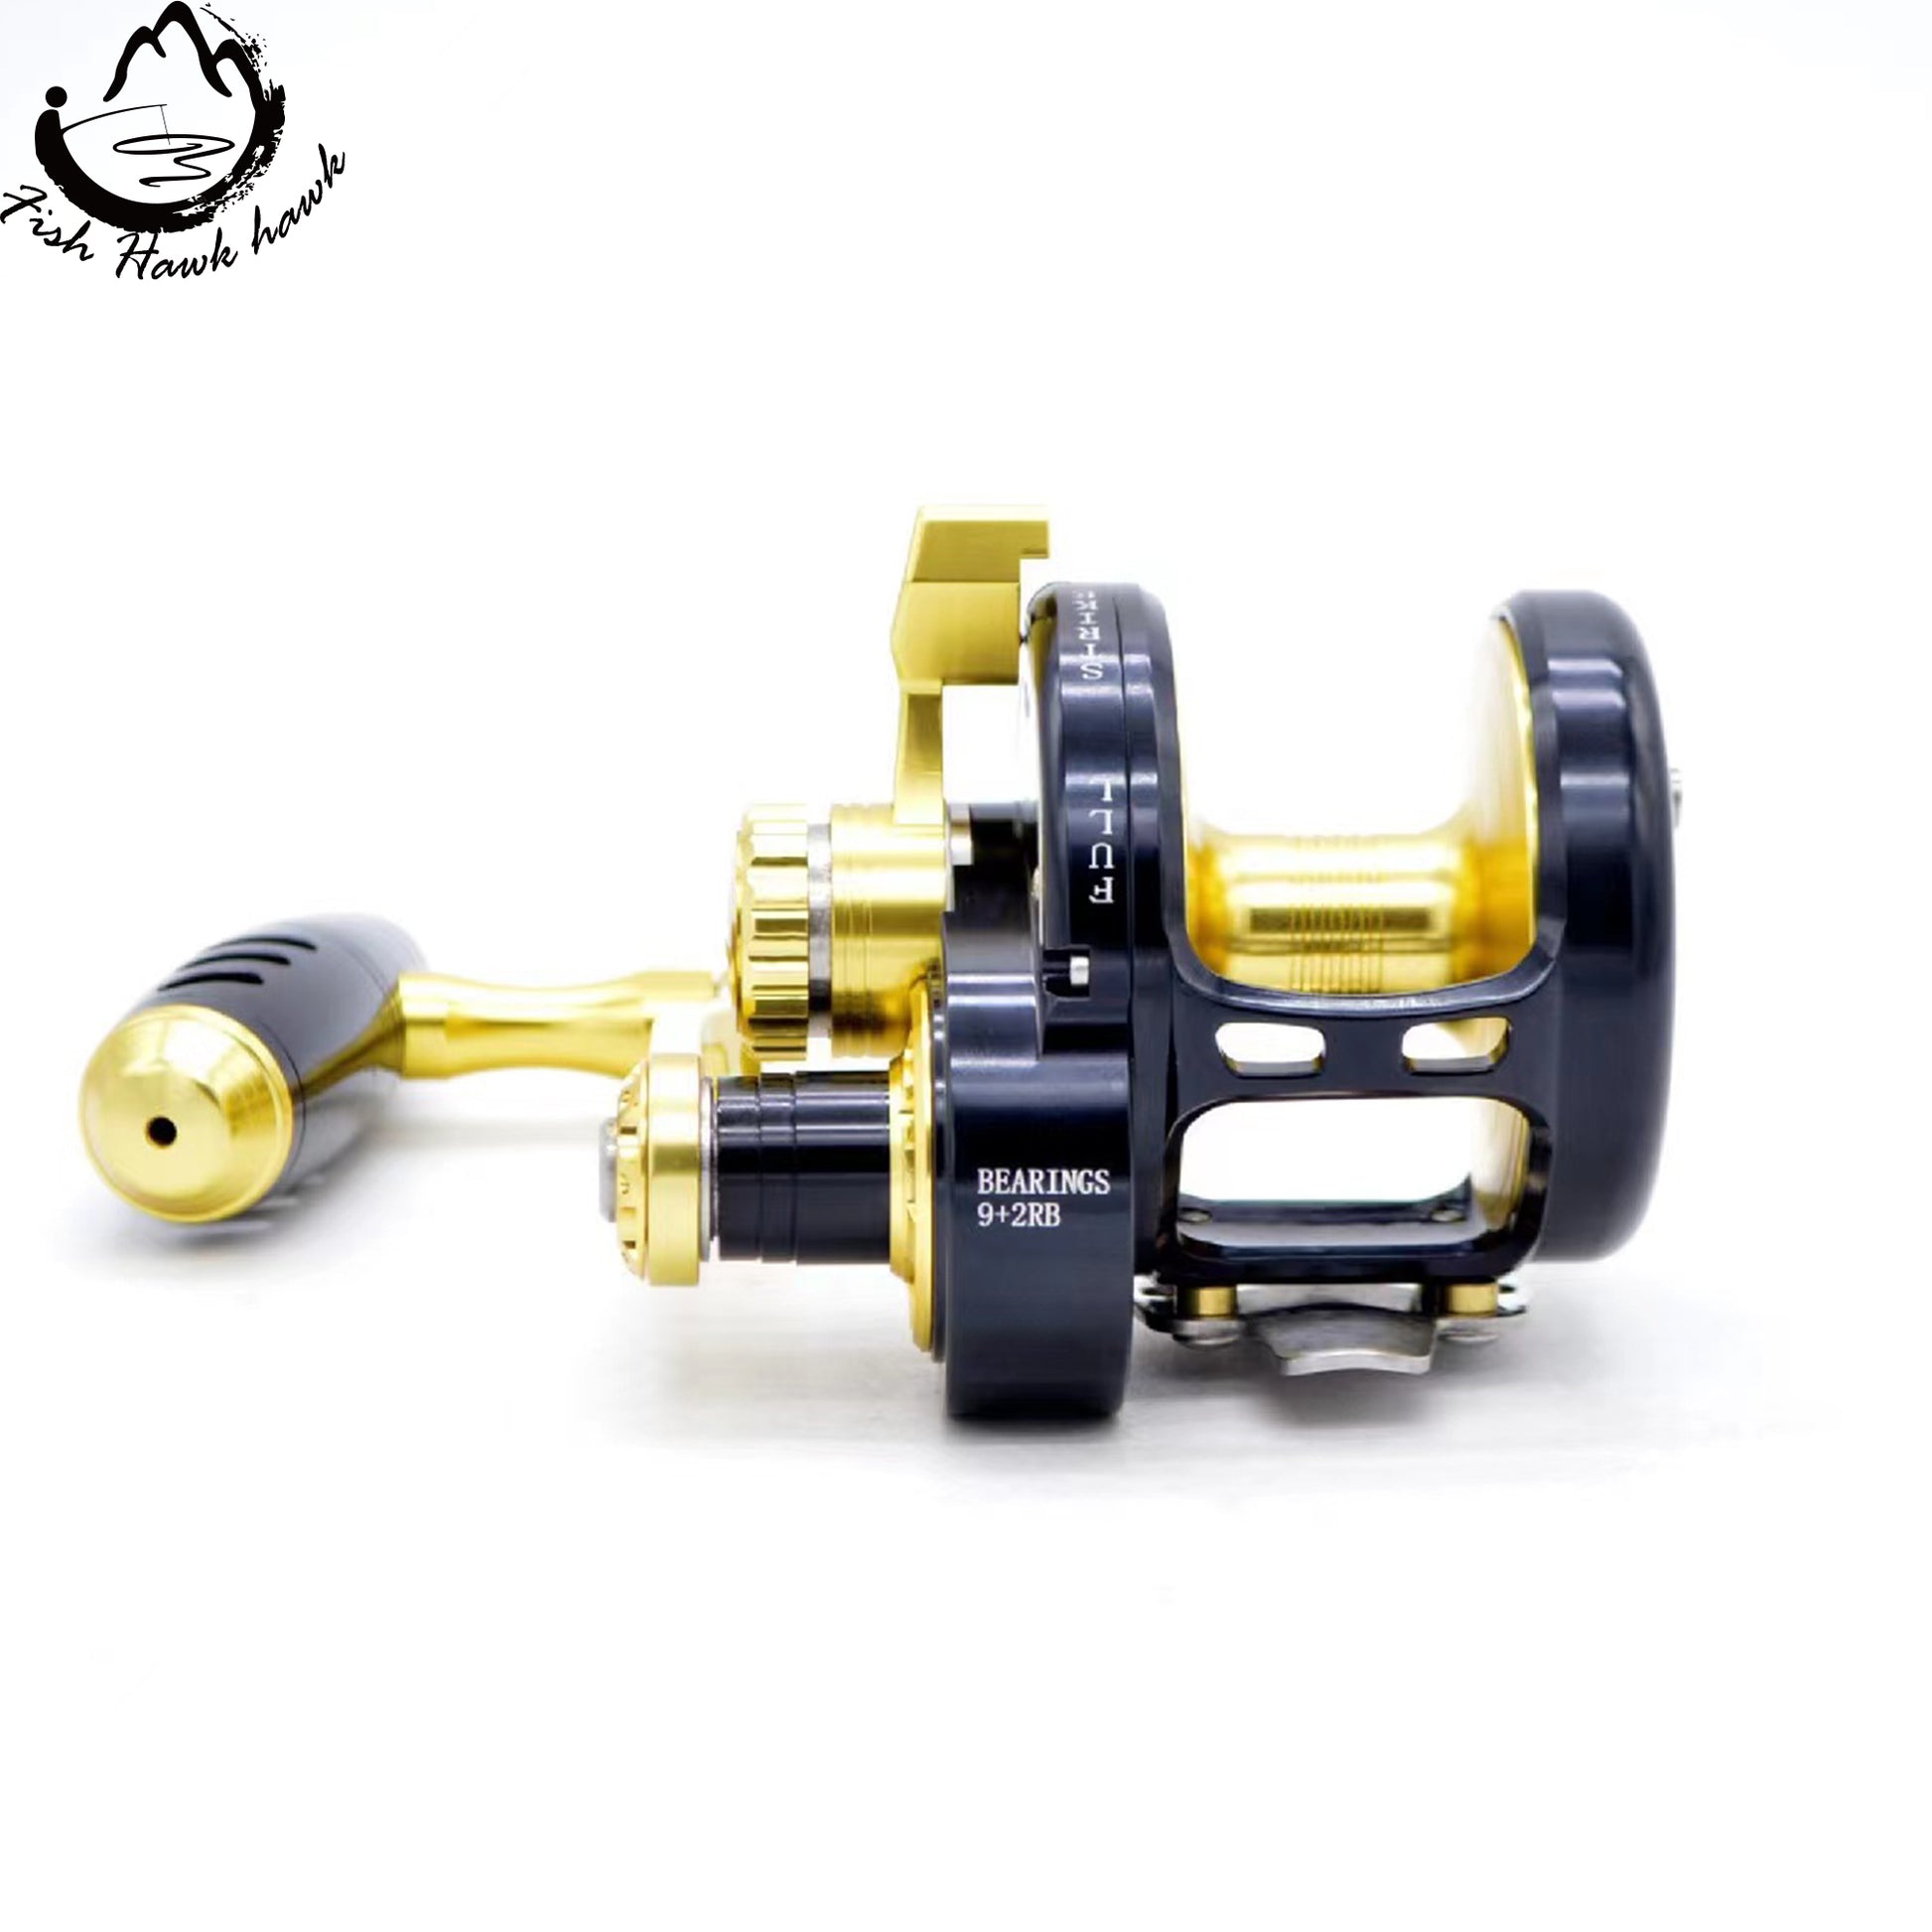 Slow Pitch Jigging Reel, slow pitch jigging rod and reel combo 